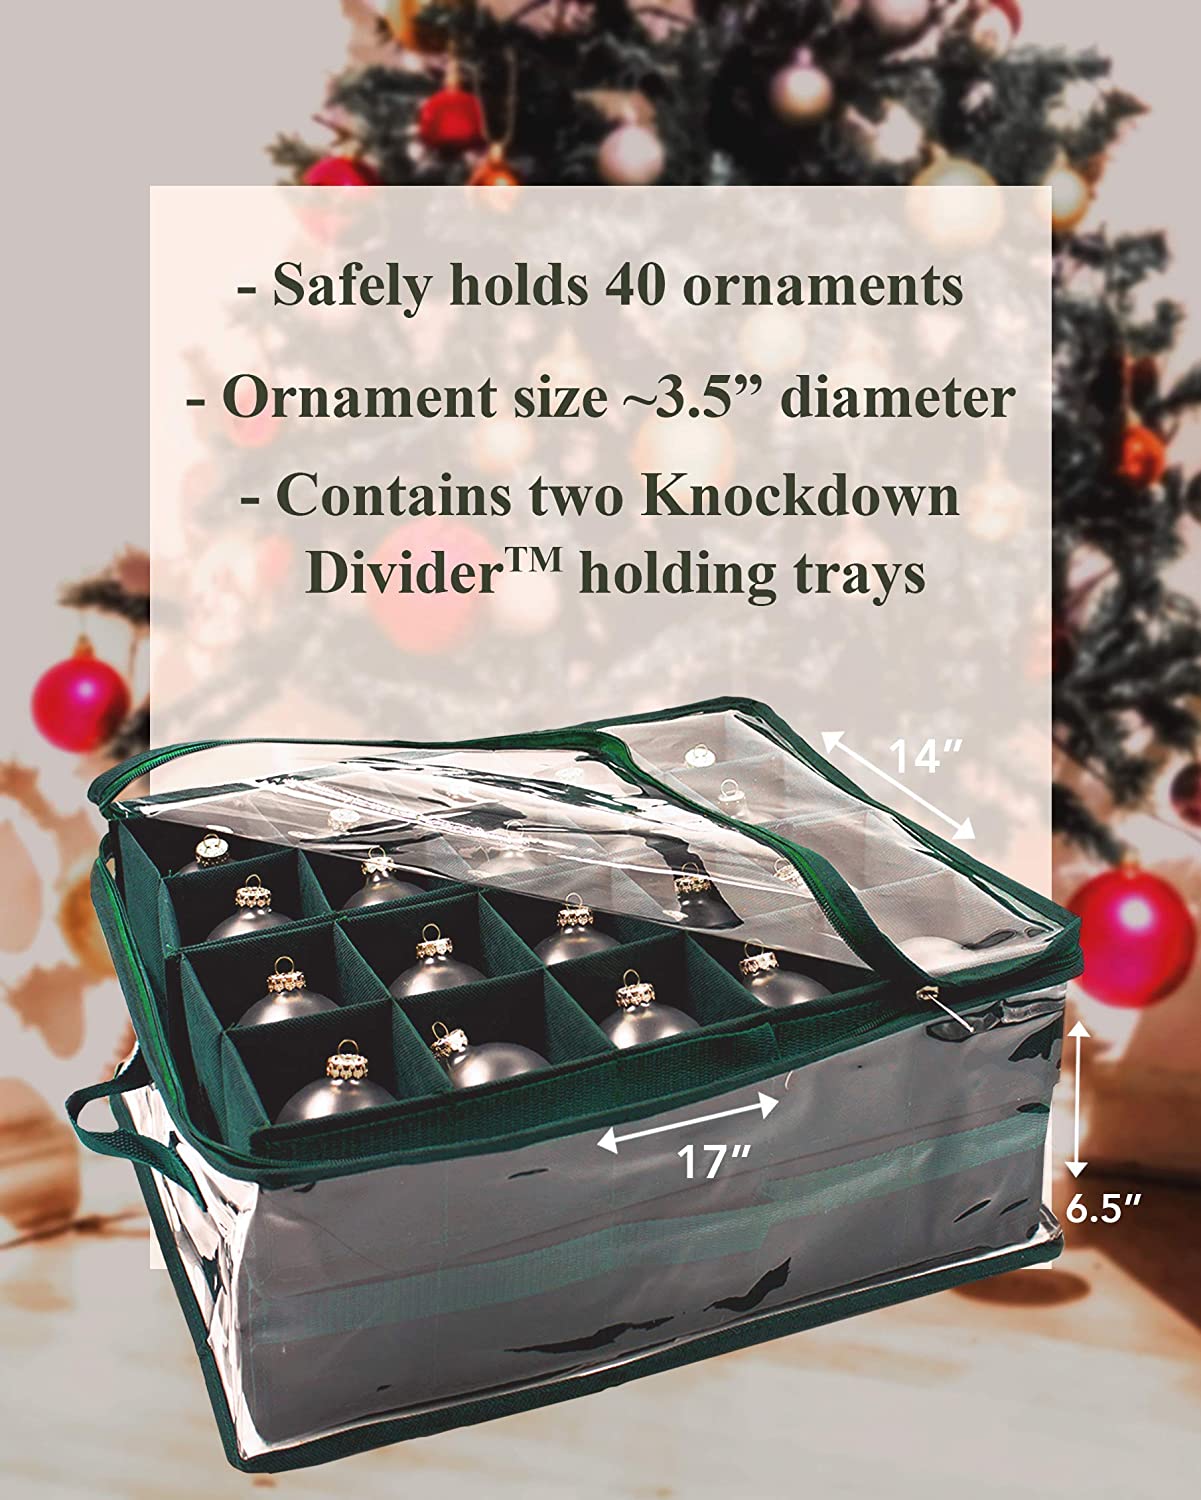 LAMINET Holiday Christmas Ornament Storage Container for 40 Ornaments | Clear Transparent Case with Convenient Nylon Carry Handles - Collapsible Walls Assemble in Seconds